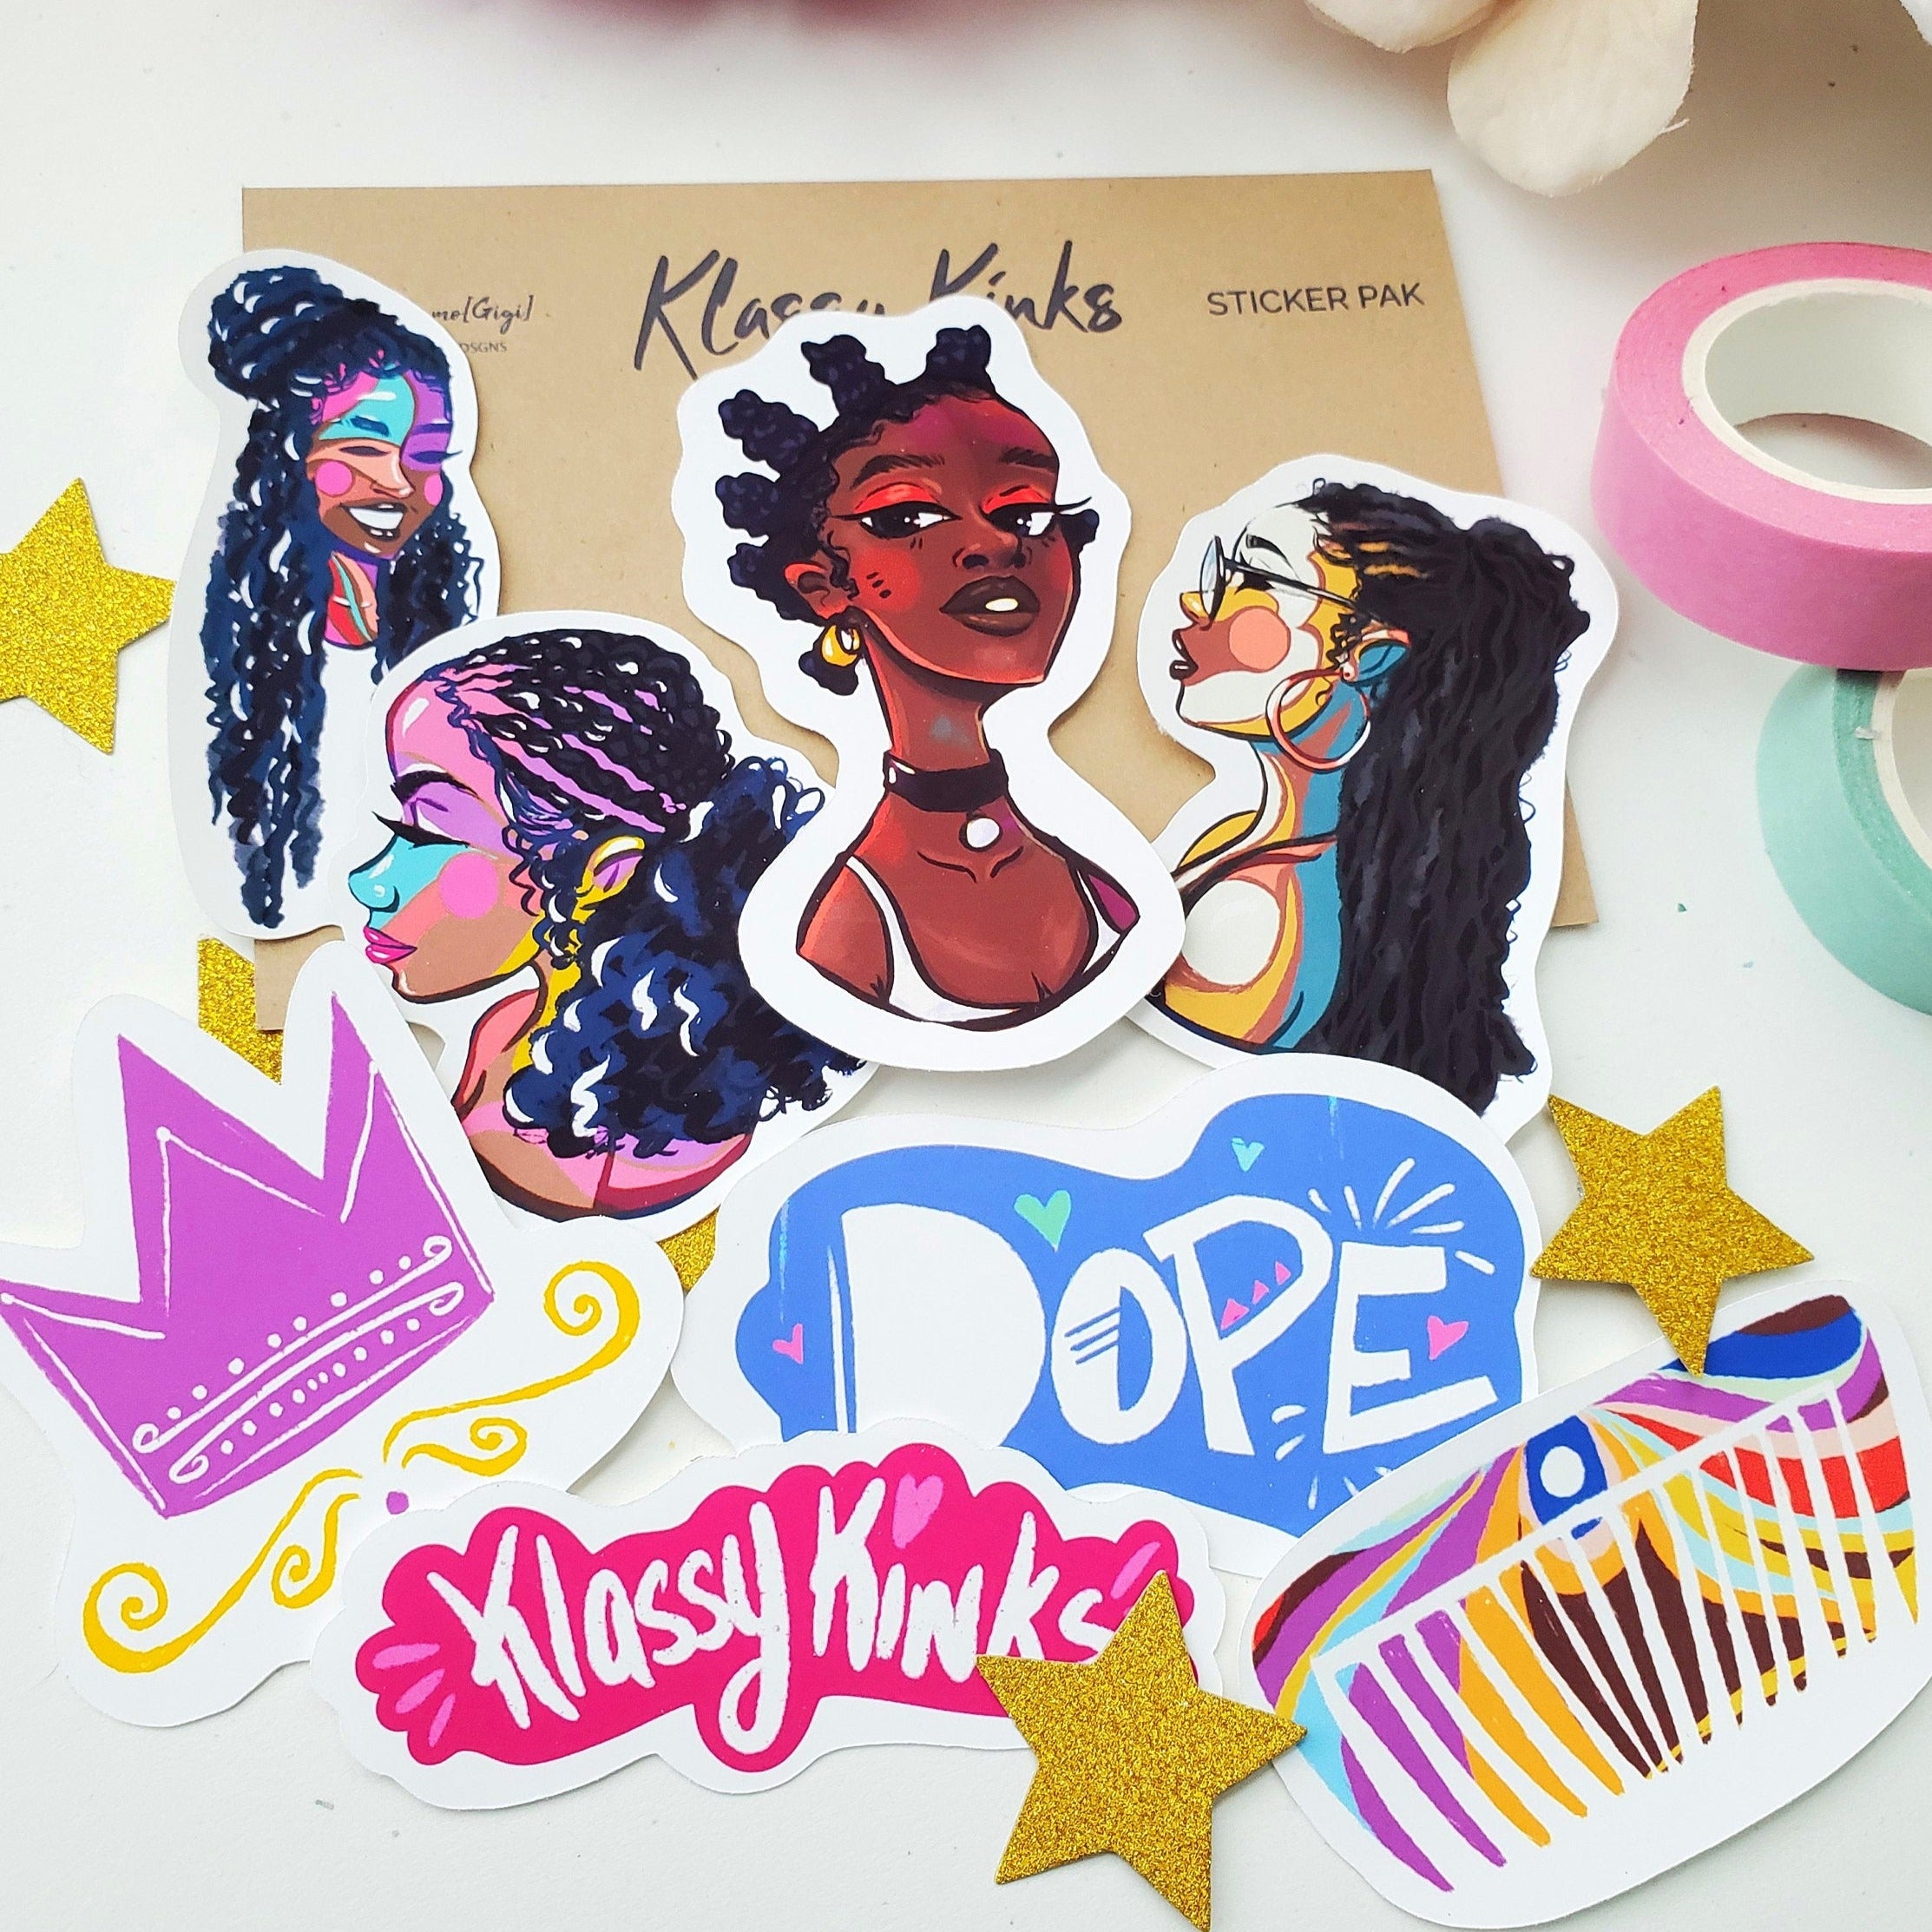 sticker journaling, aesthetic that girl, black girls rock, curly hair art, afro queen, gifts for girls, black owned shops, black culture, african american, women empowerment, art by black artists